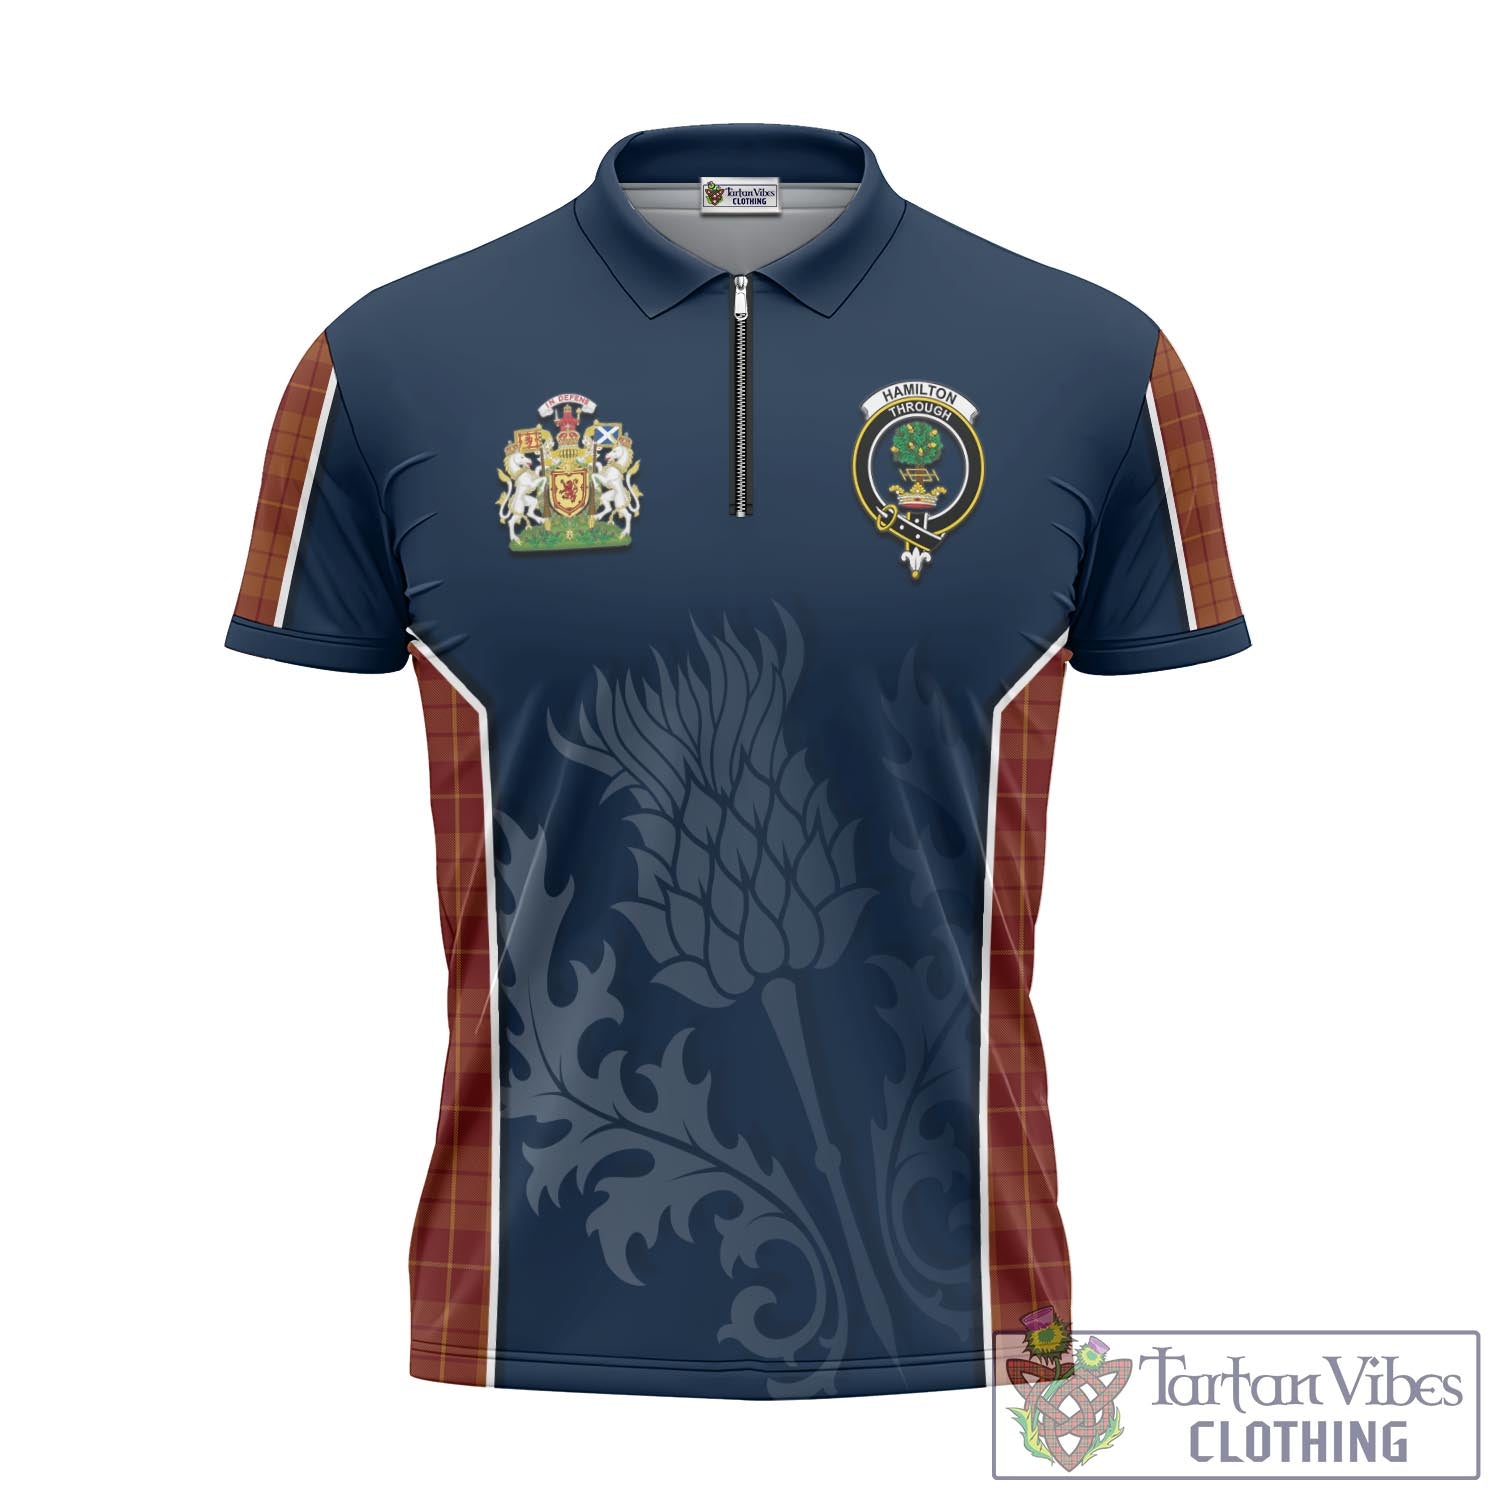 Tartan Vibes Clothing Hamilton Red Tartan Zipper Polo Shirt with Family Crest and Scottish Thistle Vibes Sport Style